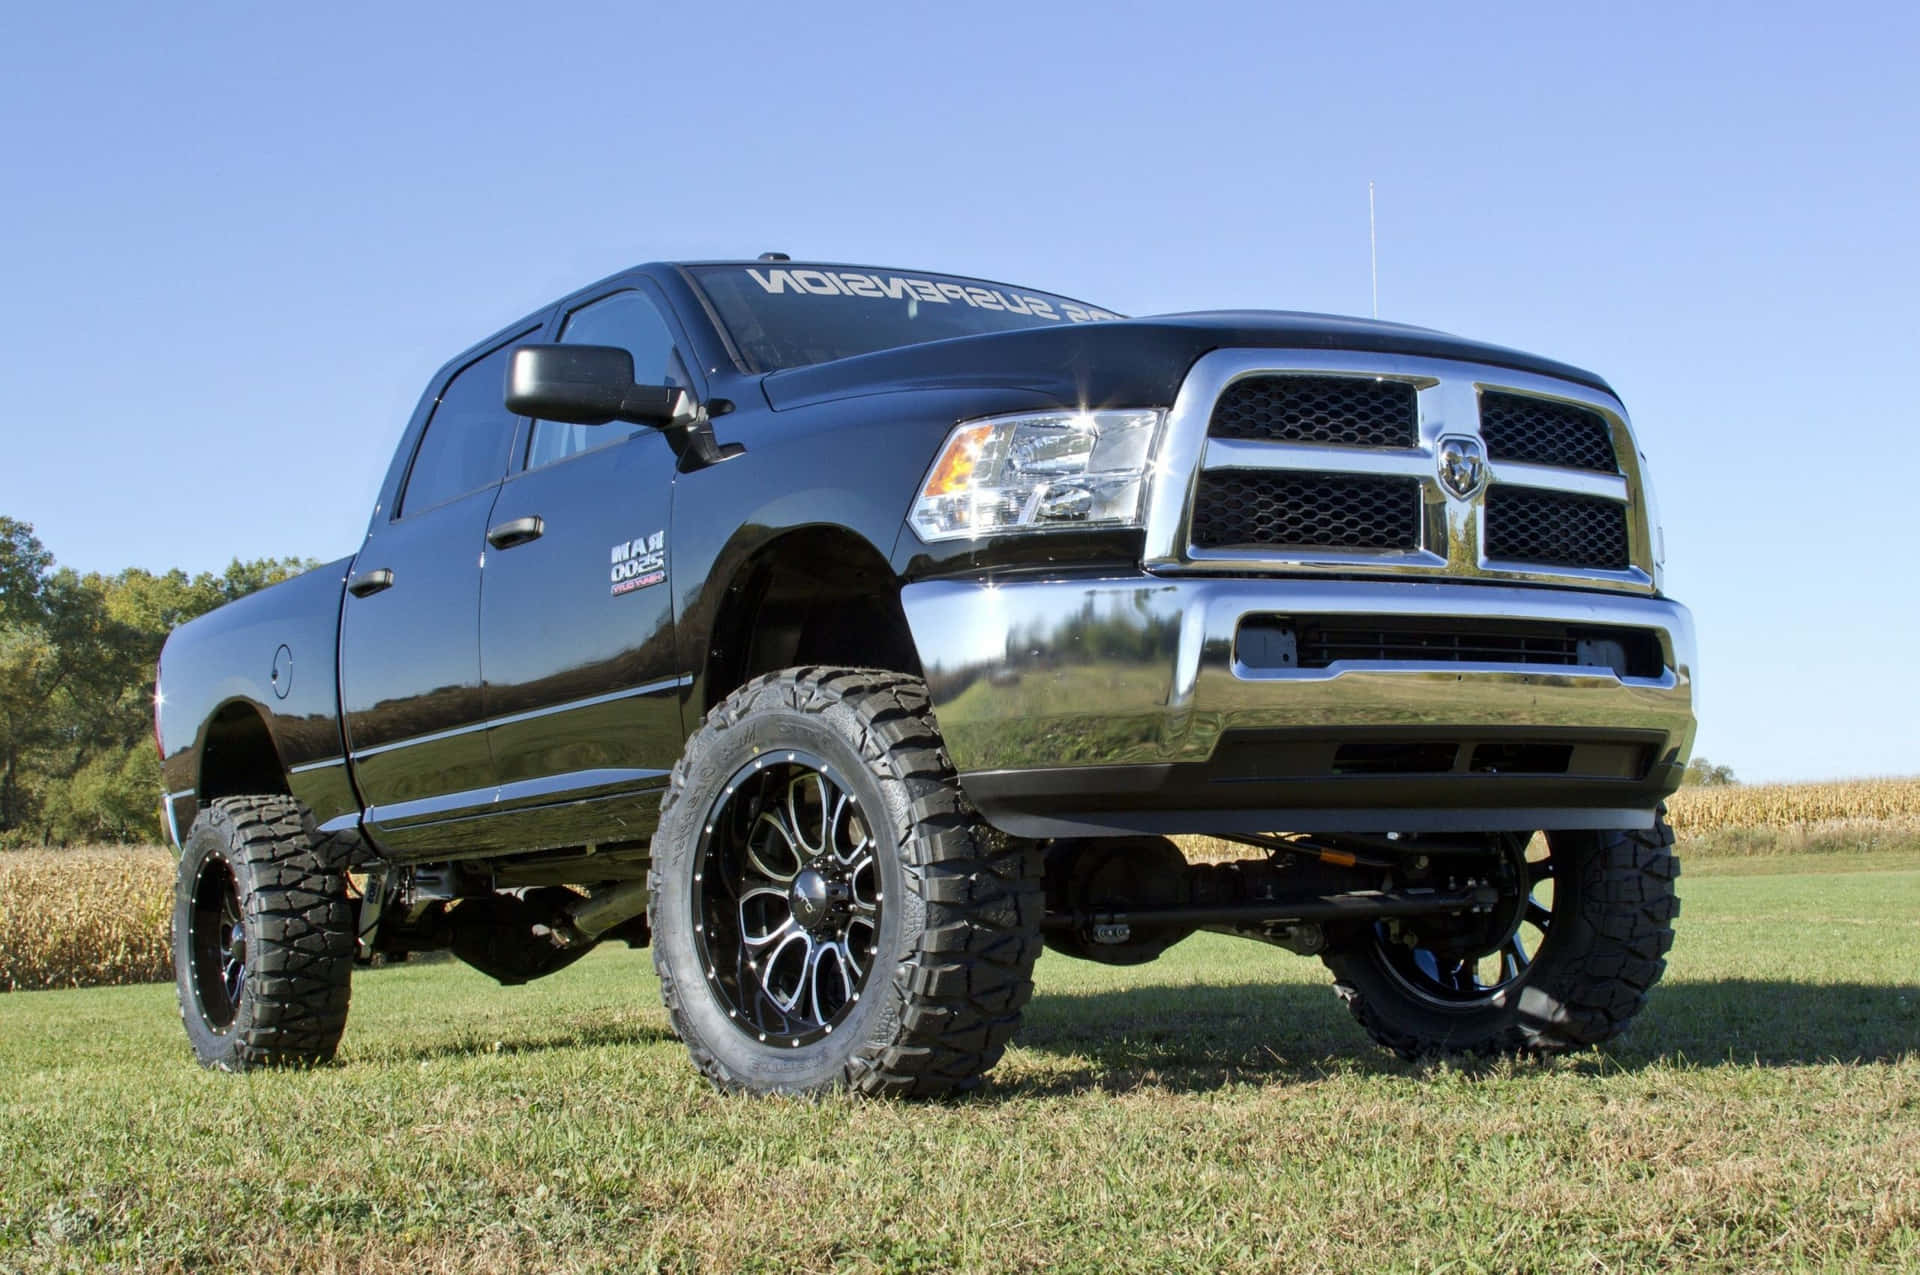 Jacked Up Trucks With Black Rims Wallpaper